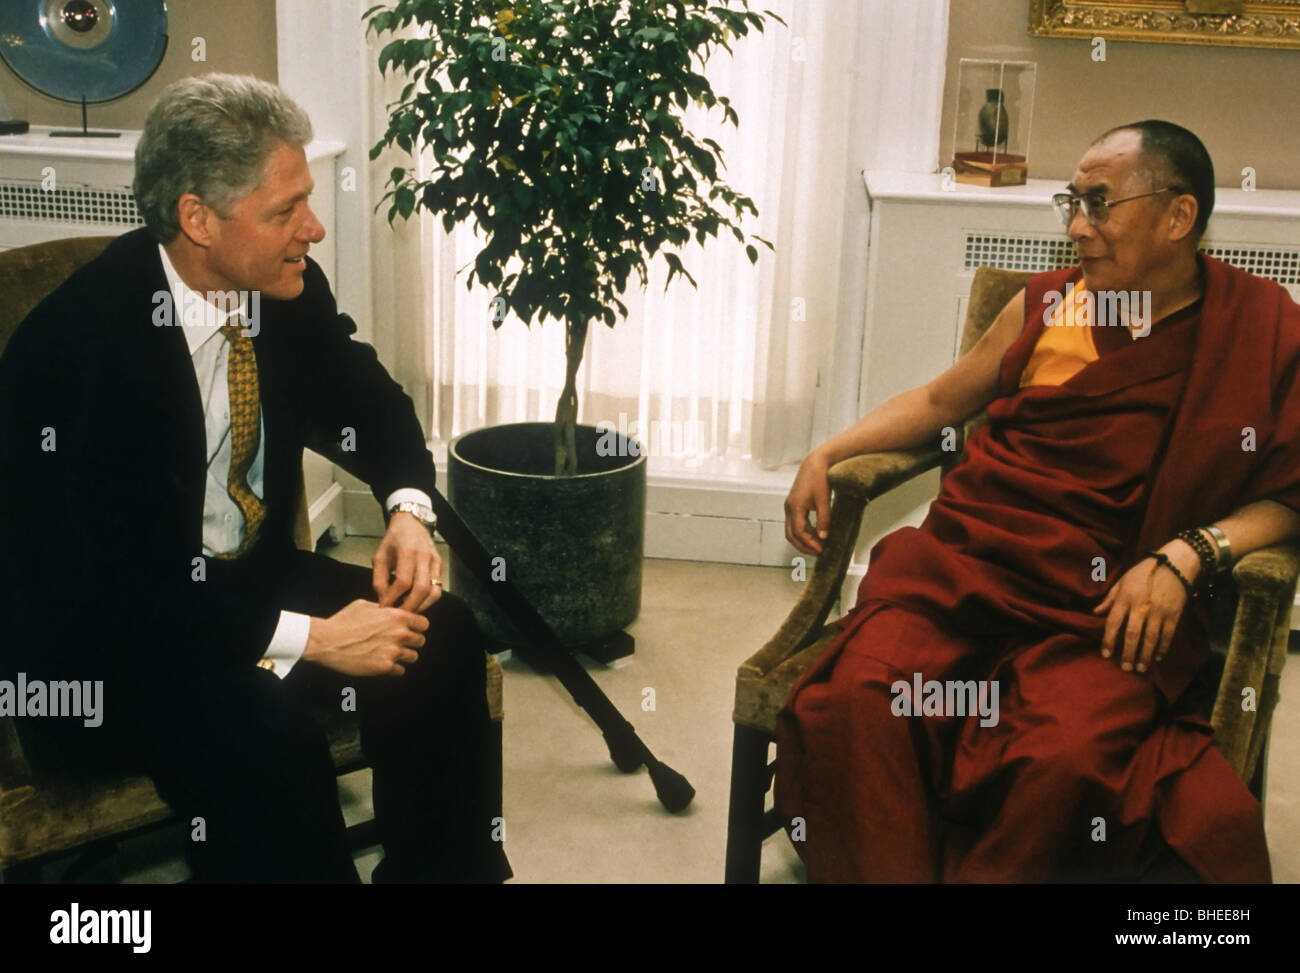 The Dalai Lama, spiritual leader of the Tibetan meets with President Bill Clinton (L) in the oval office of the White House Stock Photo